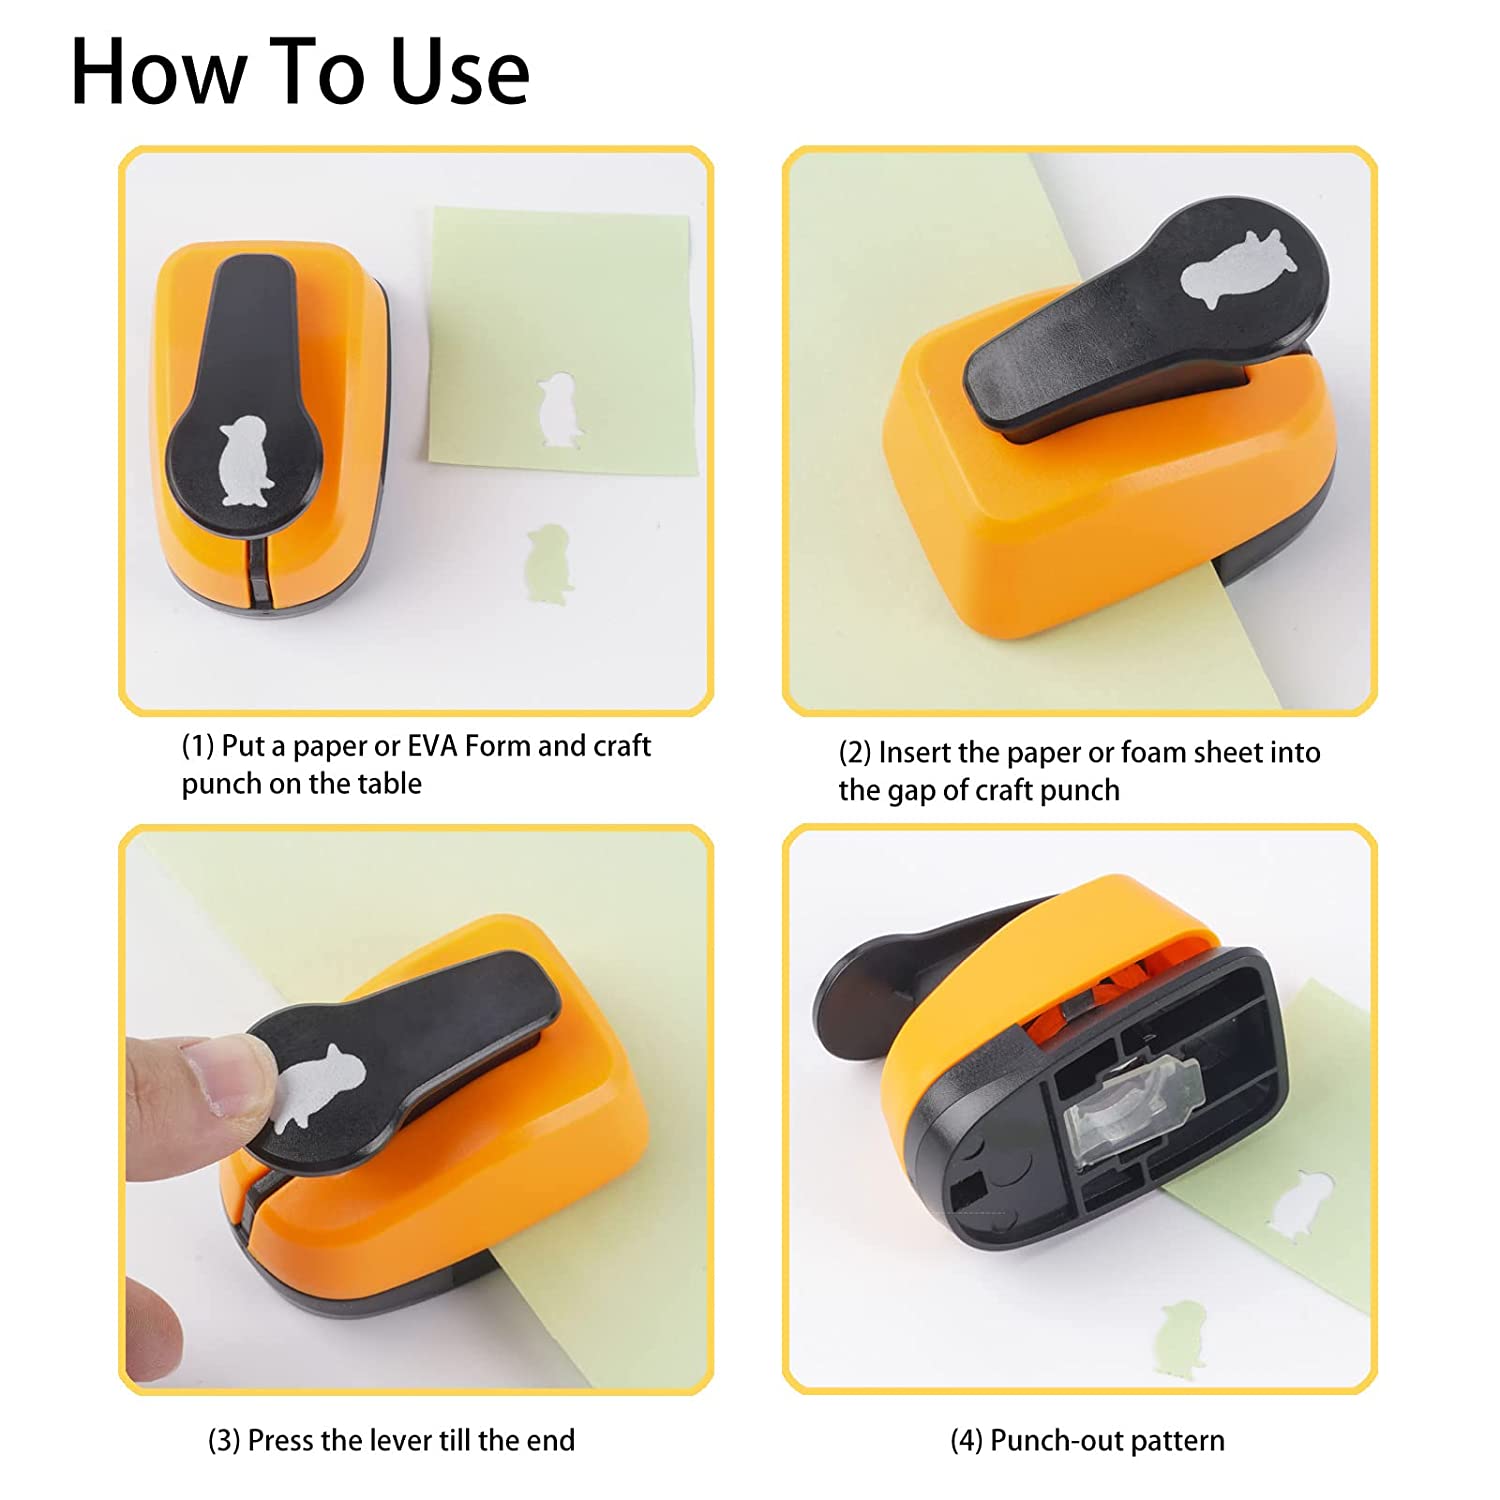 1 inch hole punch